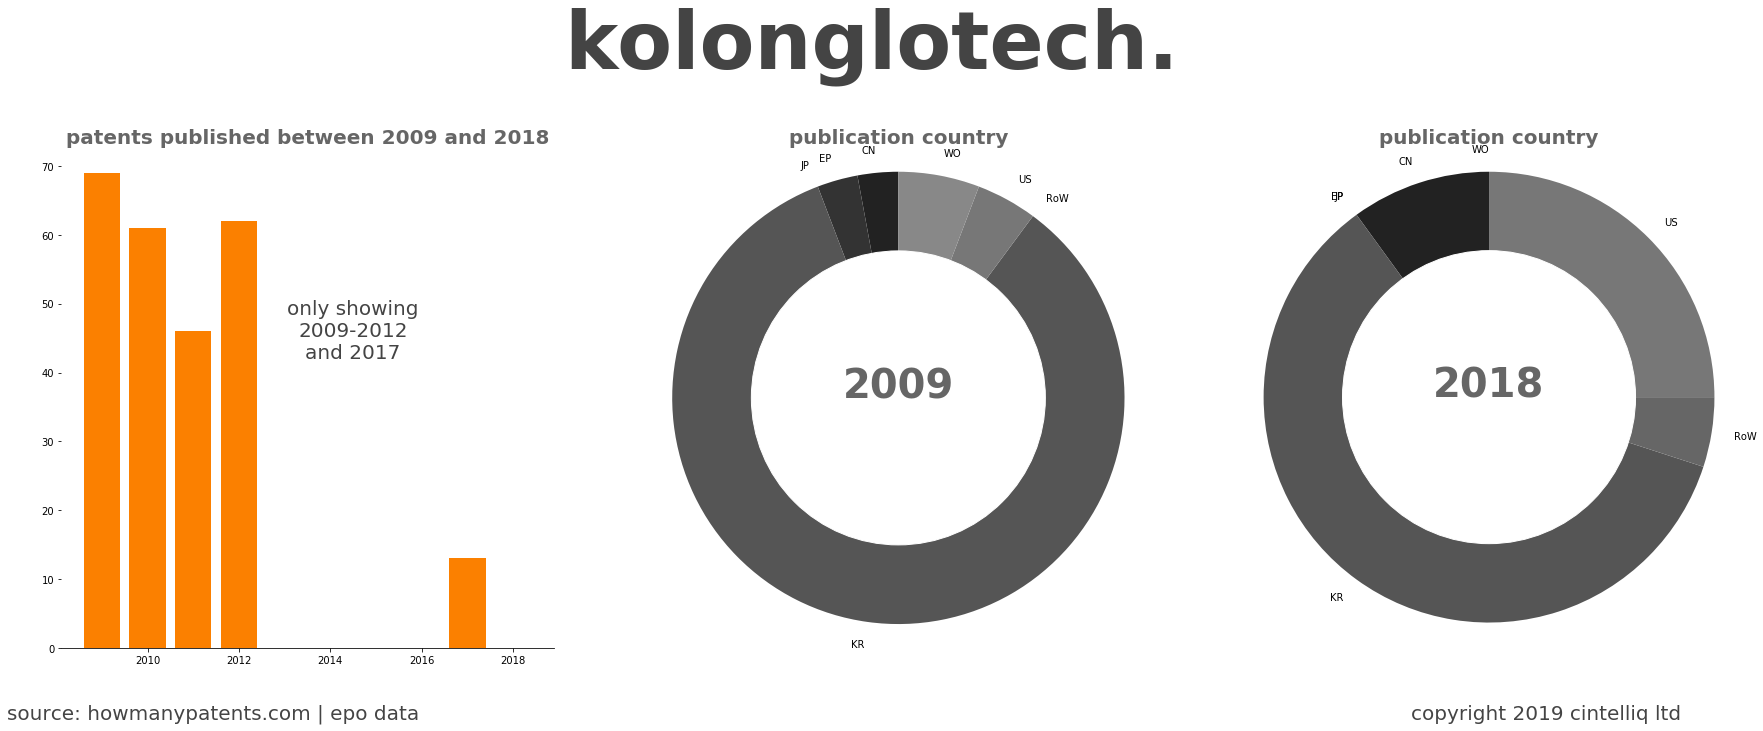 summary of patents for Kolonglotech.